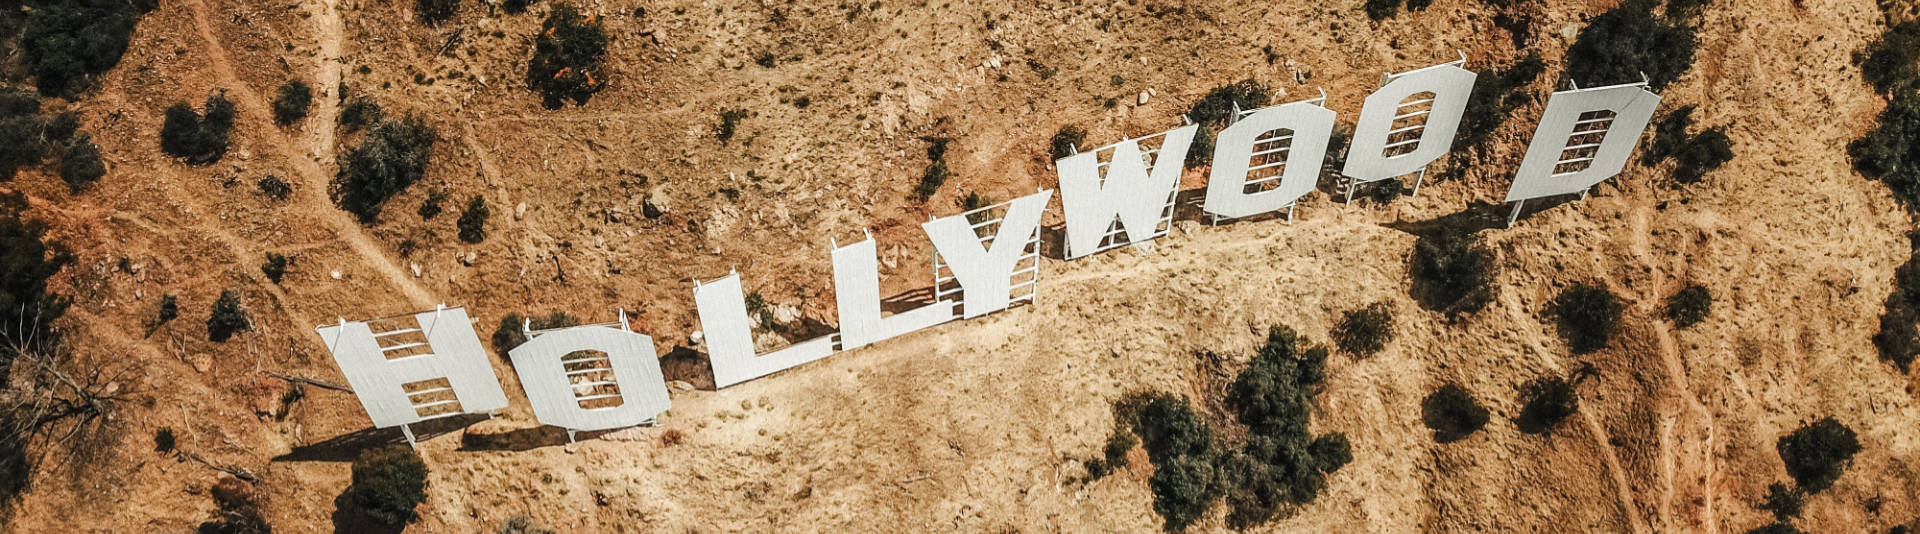 Photograph of Hollywood sign. Copyrighted. Photographer: Justin Aikin. Licensed (dz-j_dxVSCE)